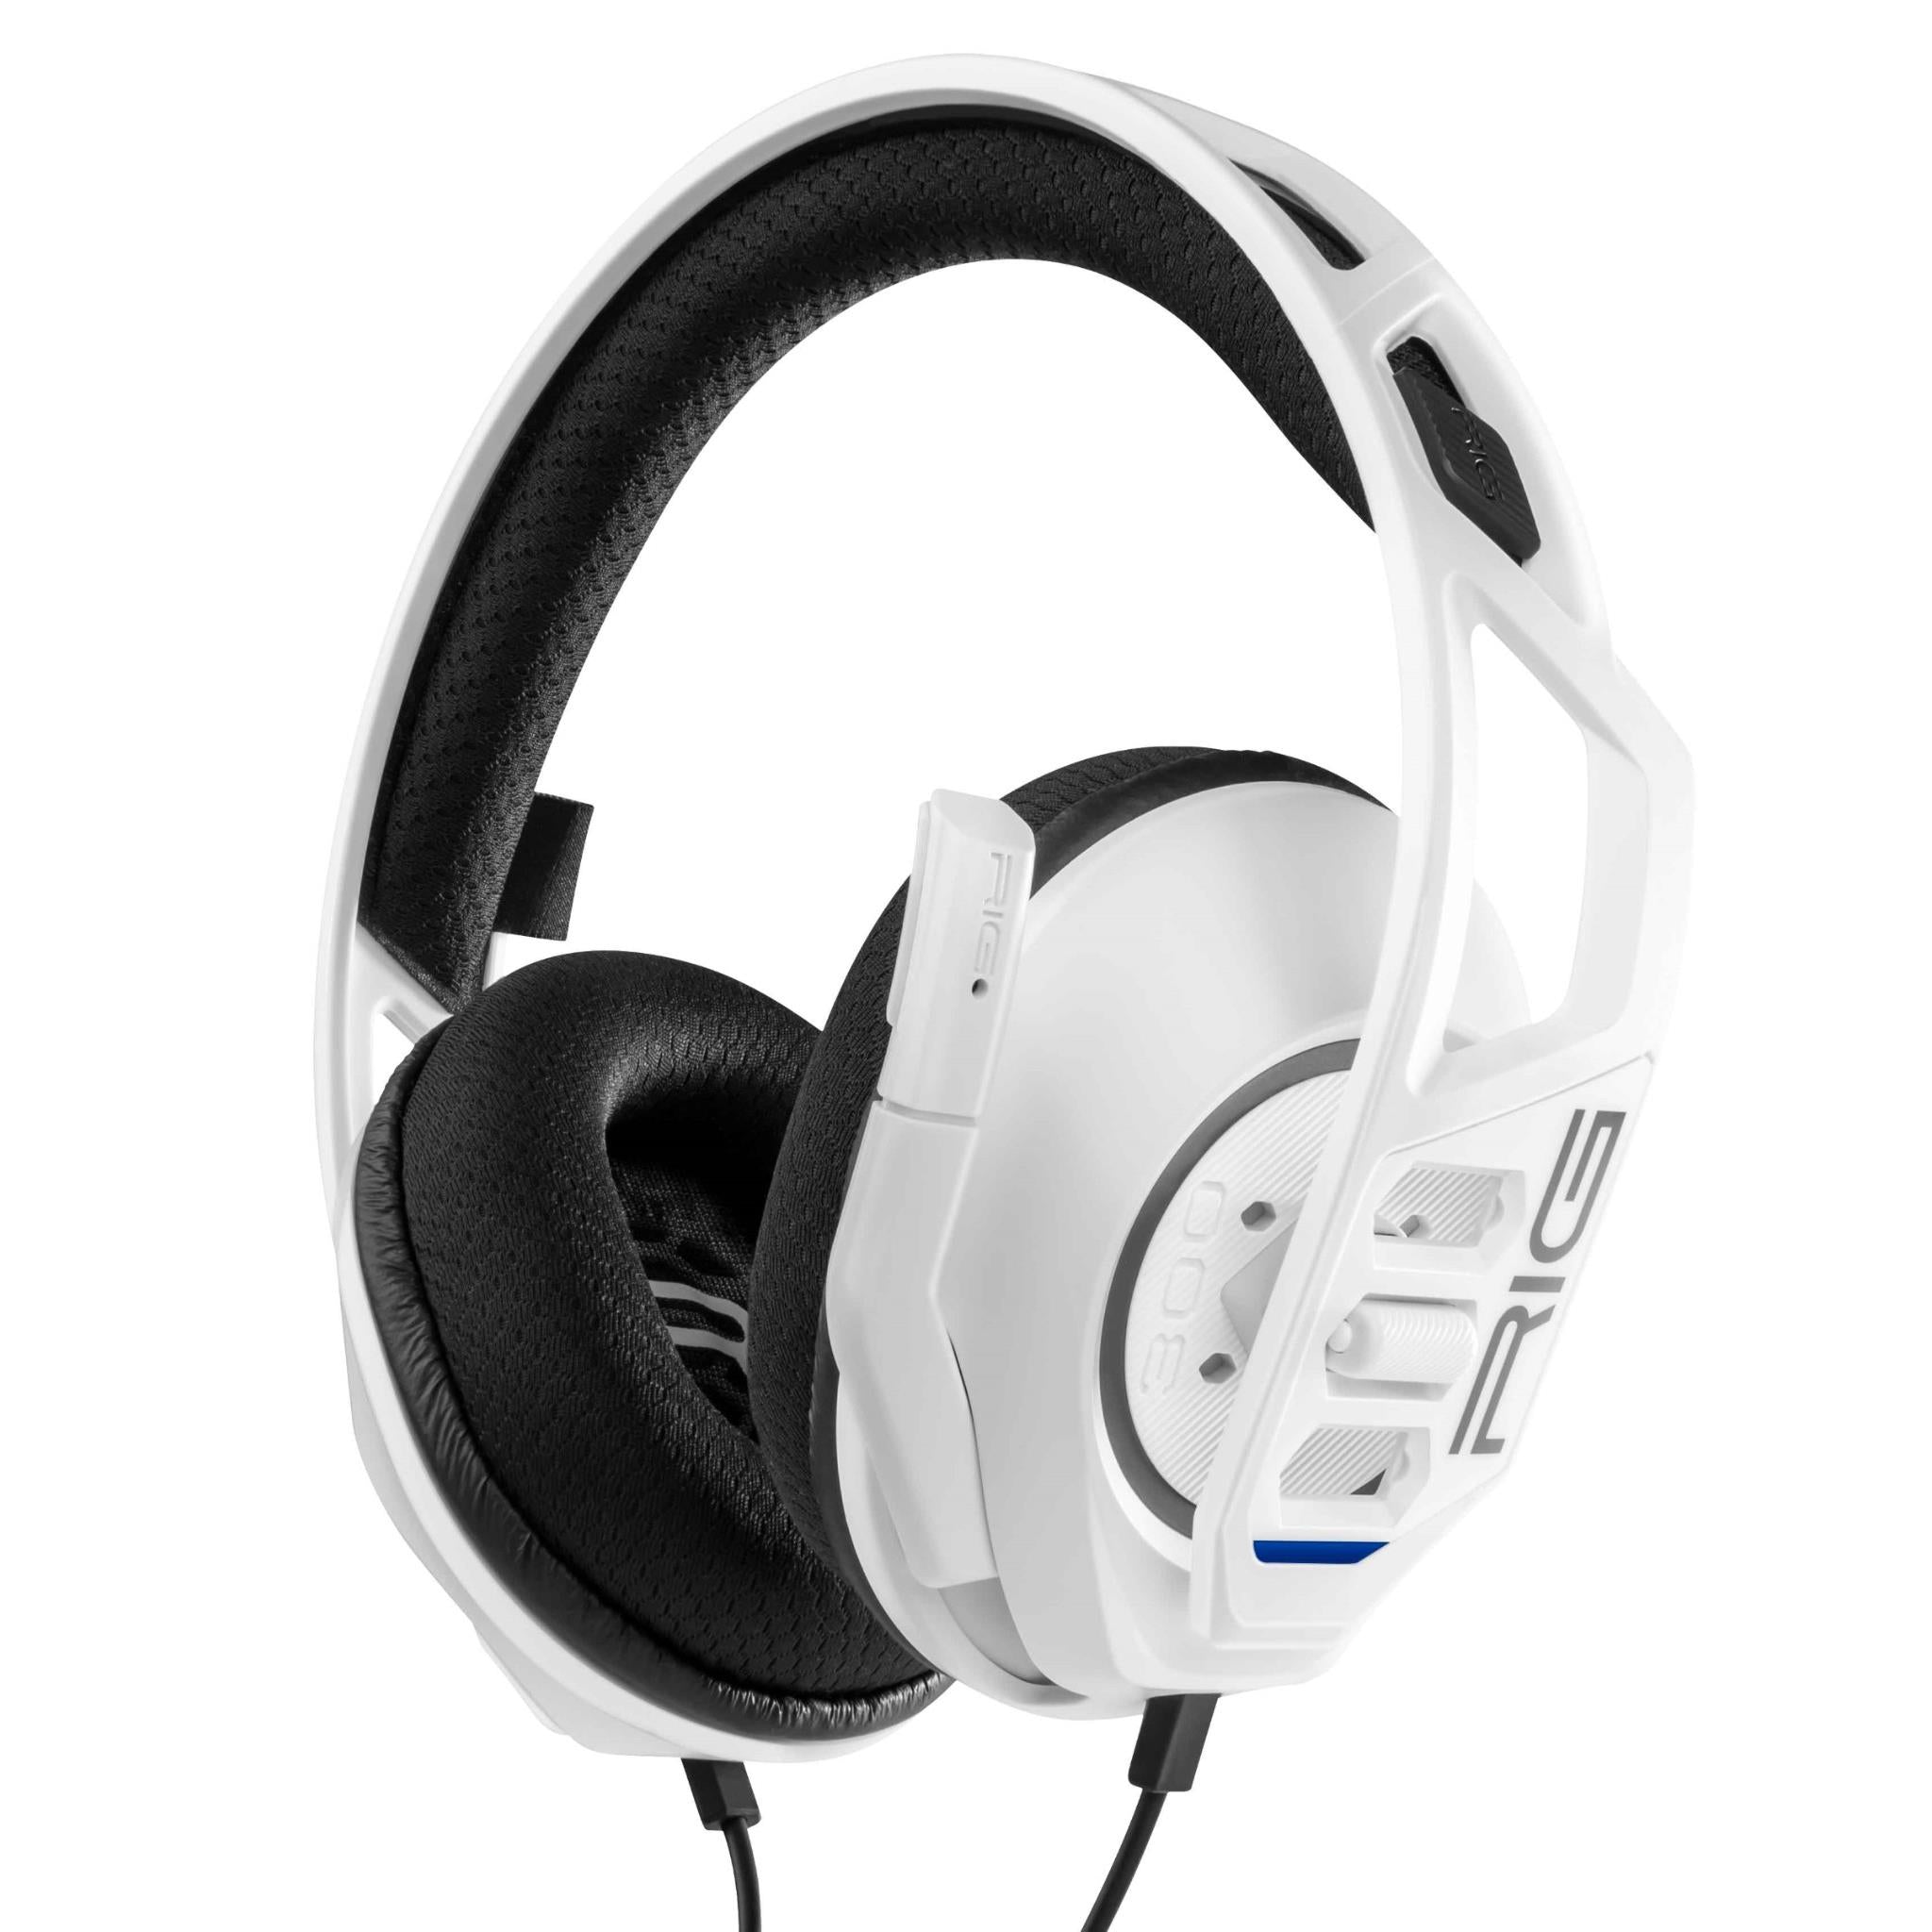 rig 300 pro hs gaming headset for playstation 5 (white)